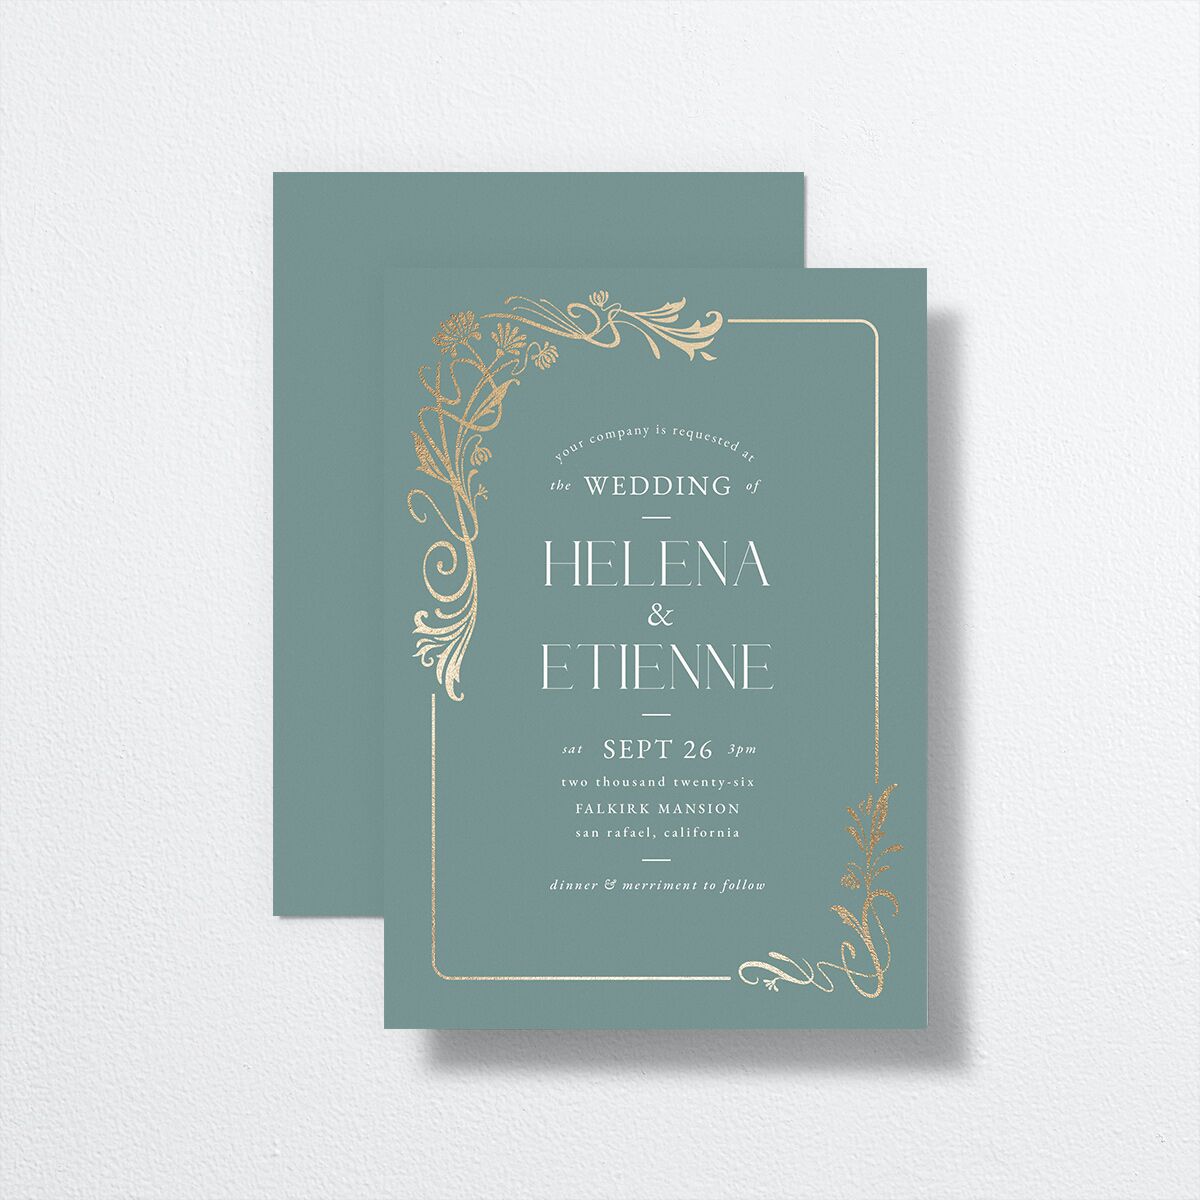 Nouveau Frame Wedding Invitations front-and-back in blue